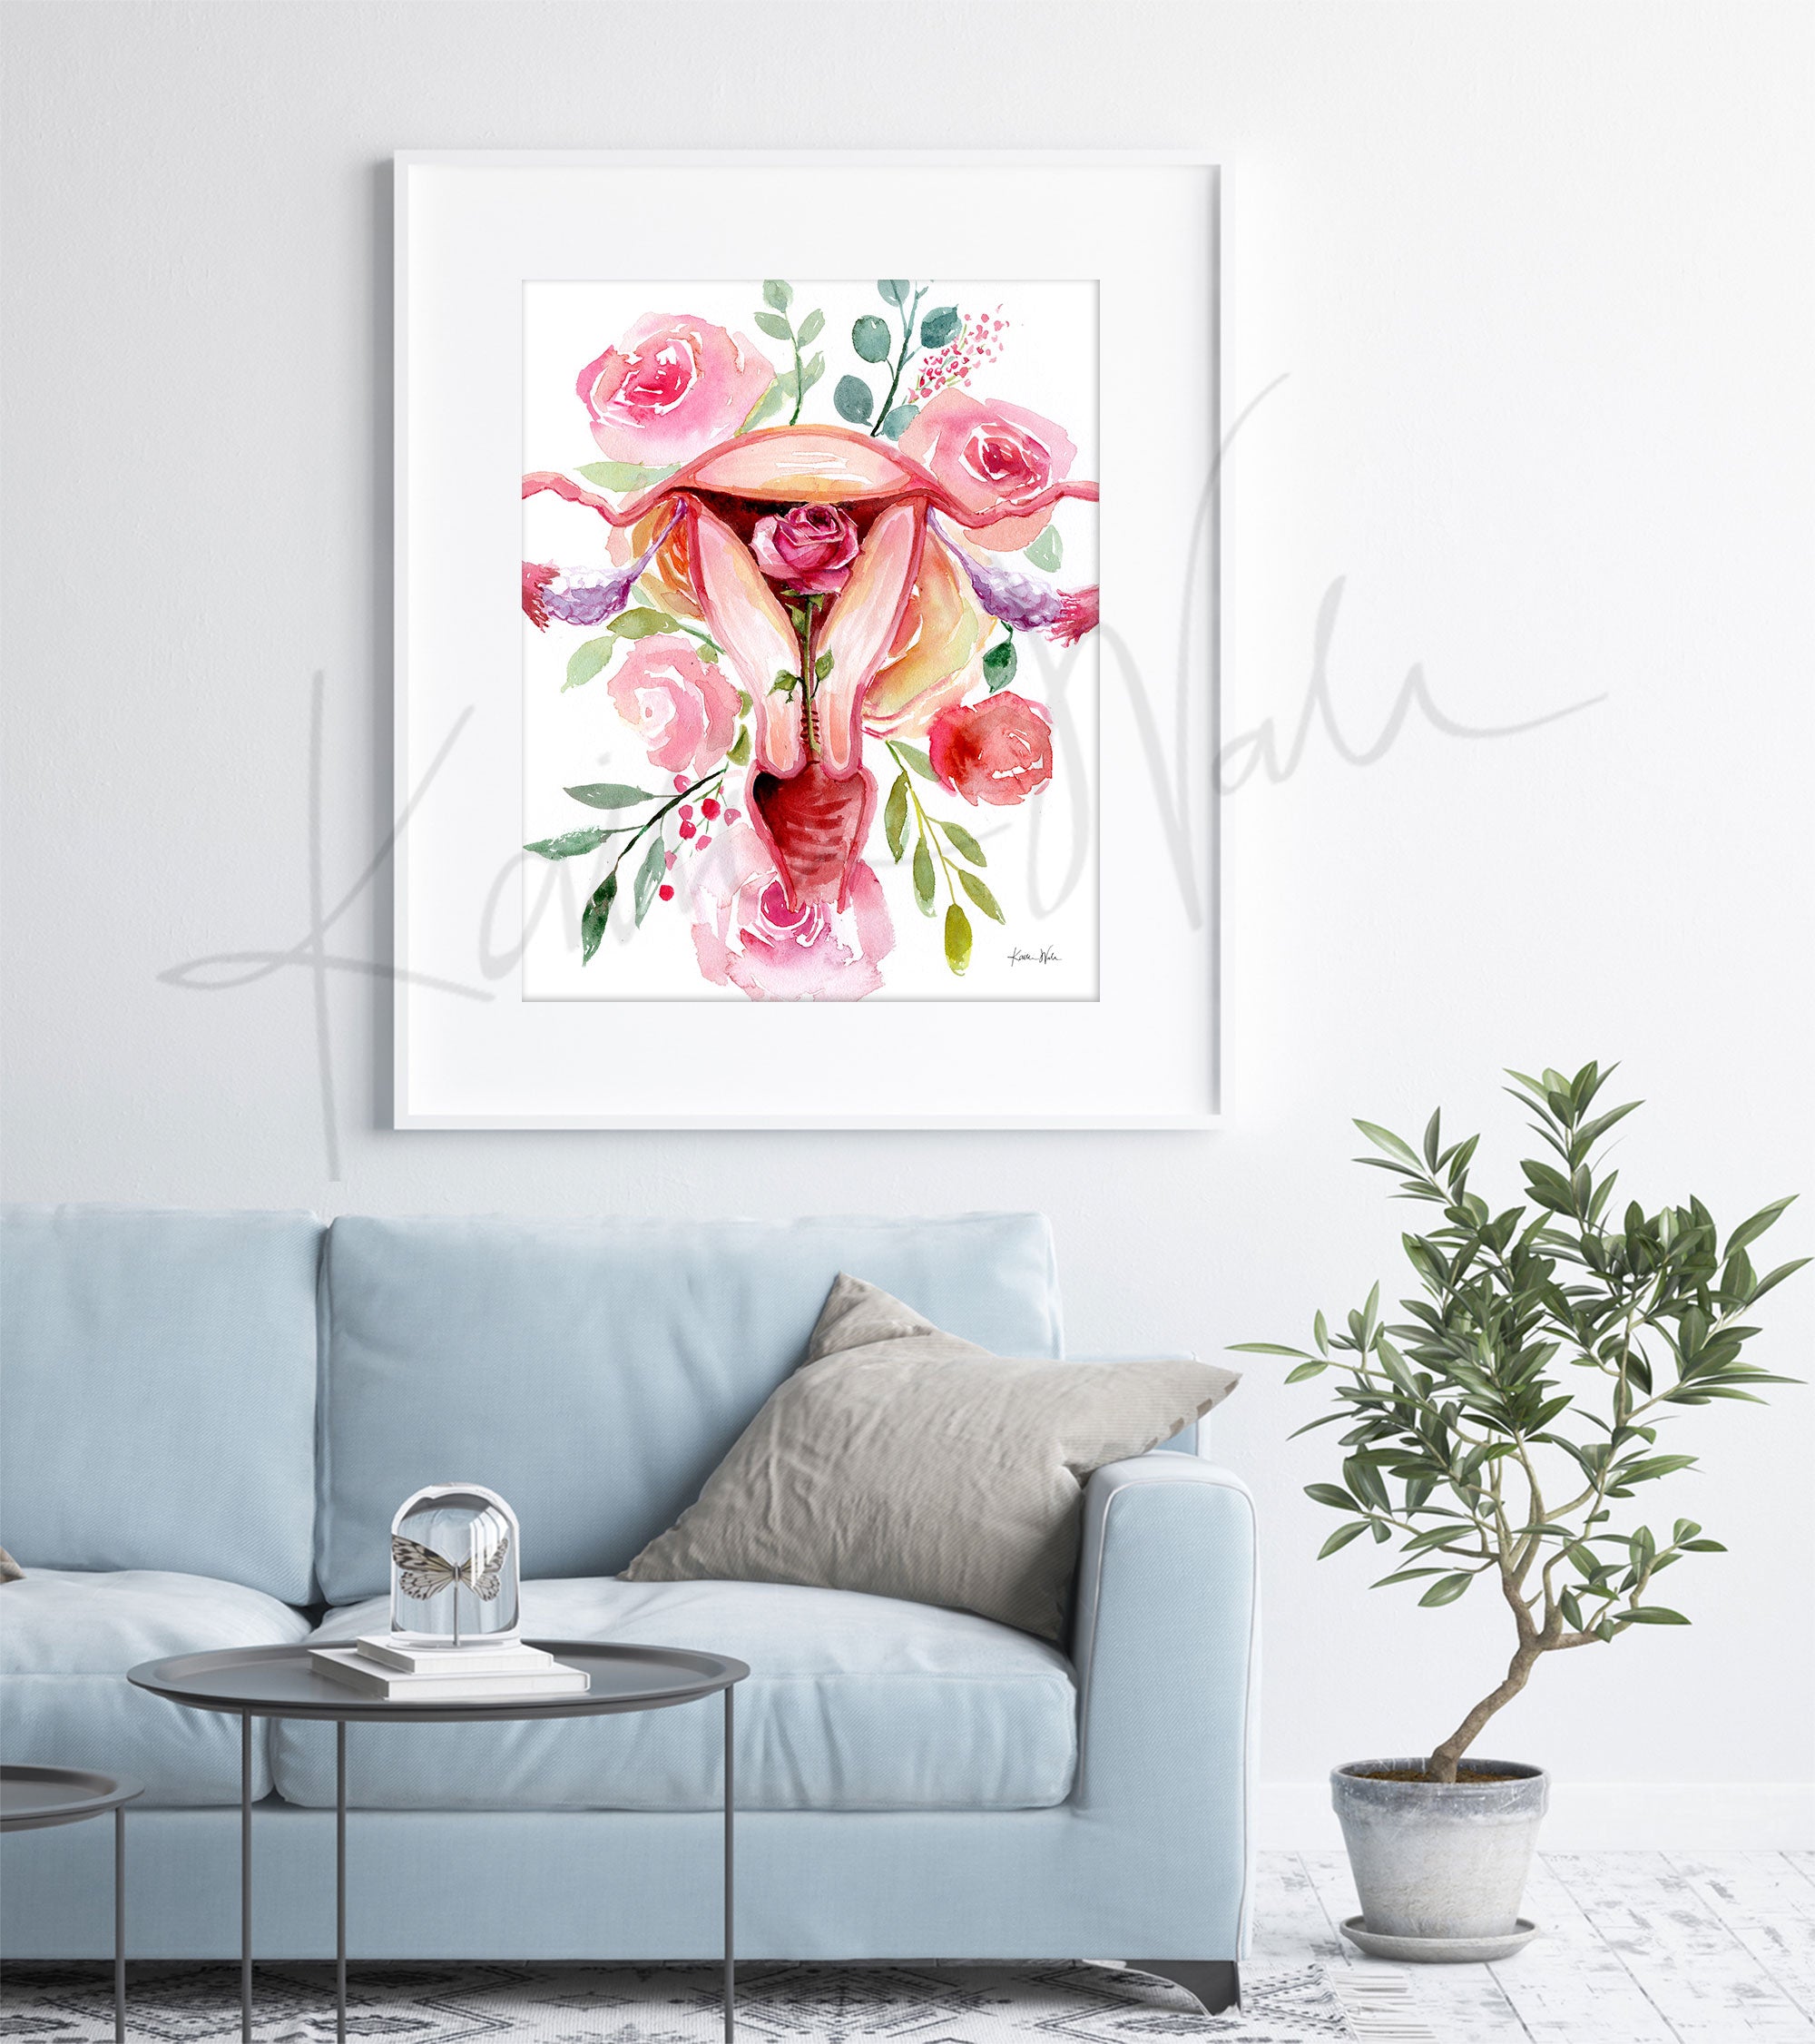 Framed watercolor painting of a uterus with flowers around. The painting is hanging over a blue couch.